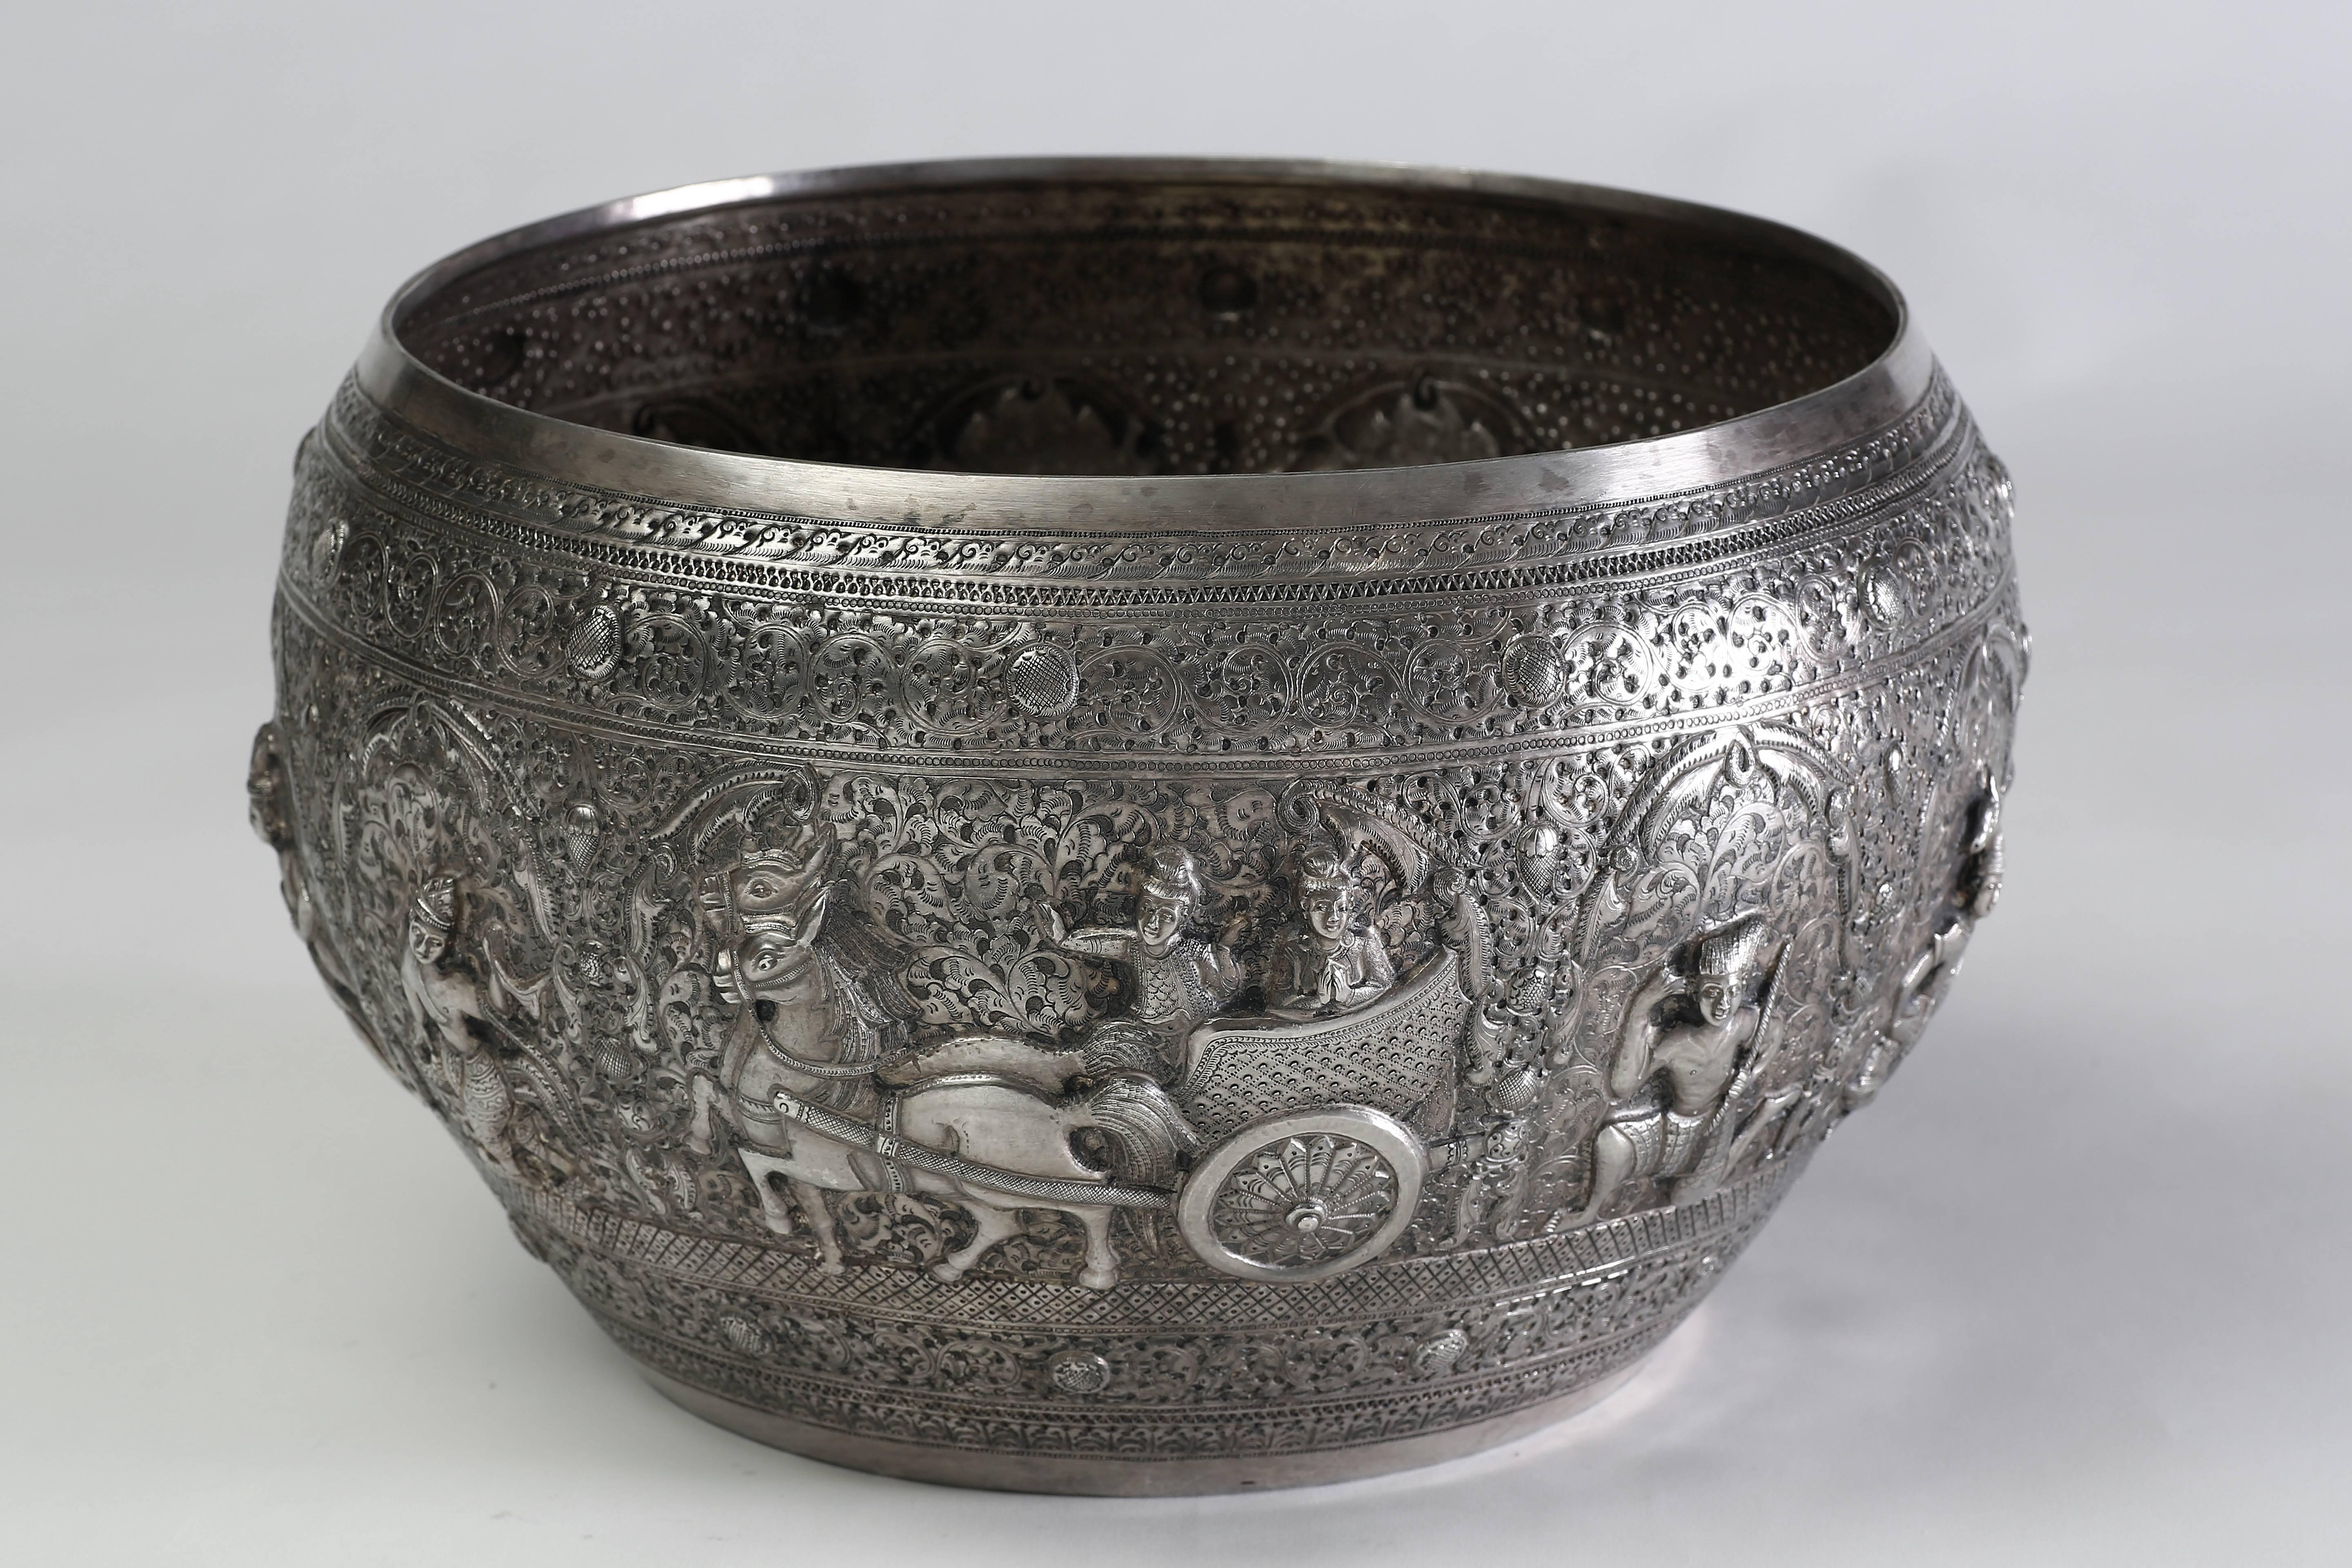 The fine silver bowl depicts scenes of various adventures from the Jataka story, hammered into the silver in high relief and repousse and surrounded by relief floral decoration.
The extraordinary silver bowl is traditionally used for ceremonial or